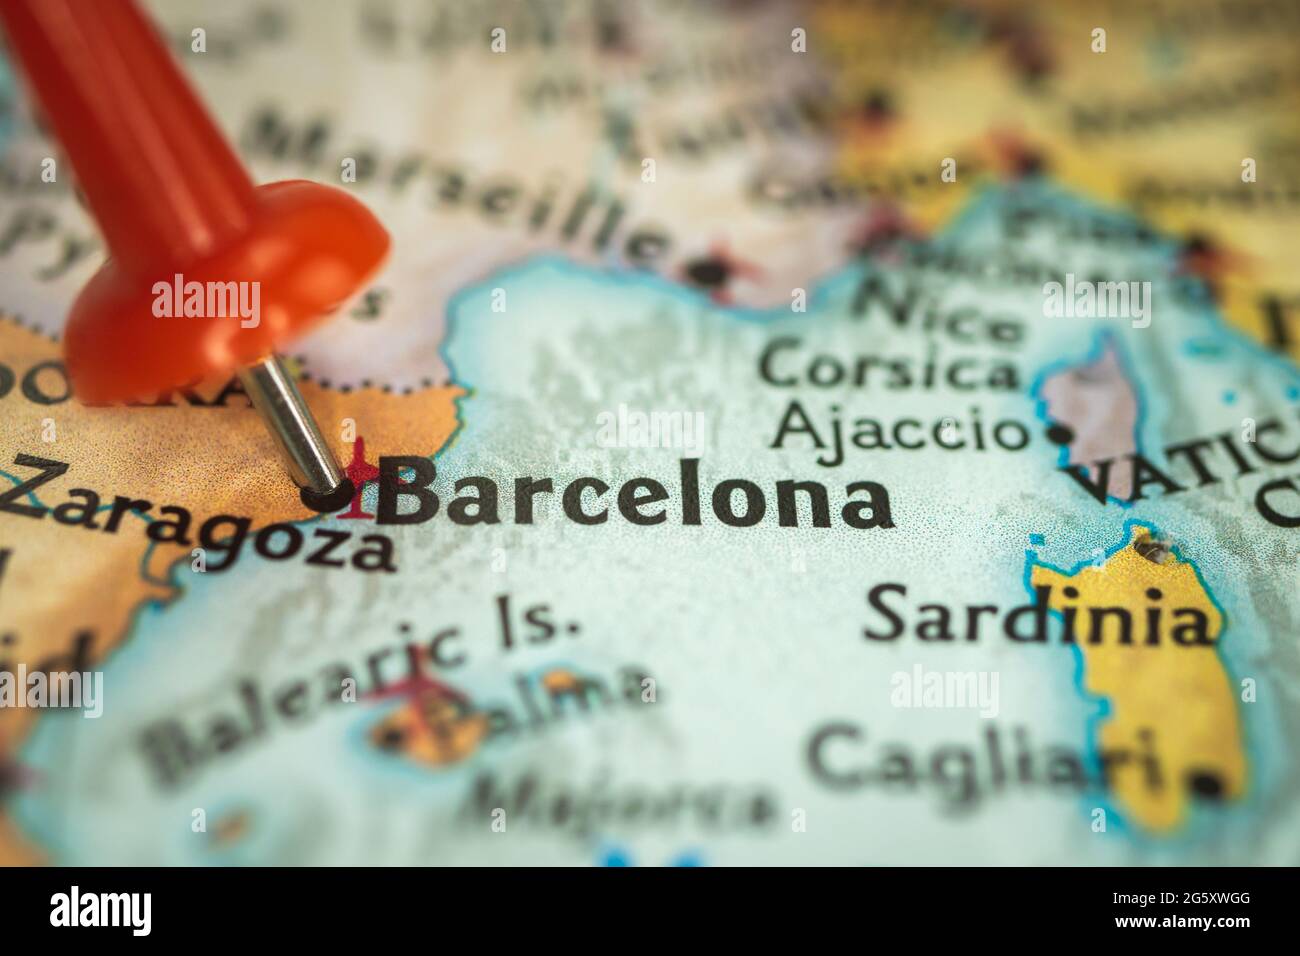 Location Barselona in Spain, push pin on map closeup, marker of destination for travel, tourism and trip concept, Europe Stock Photo